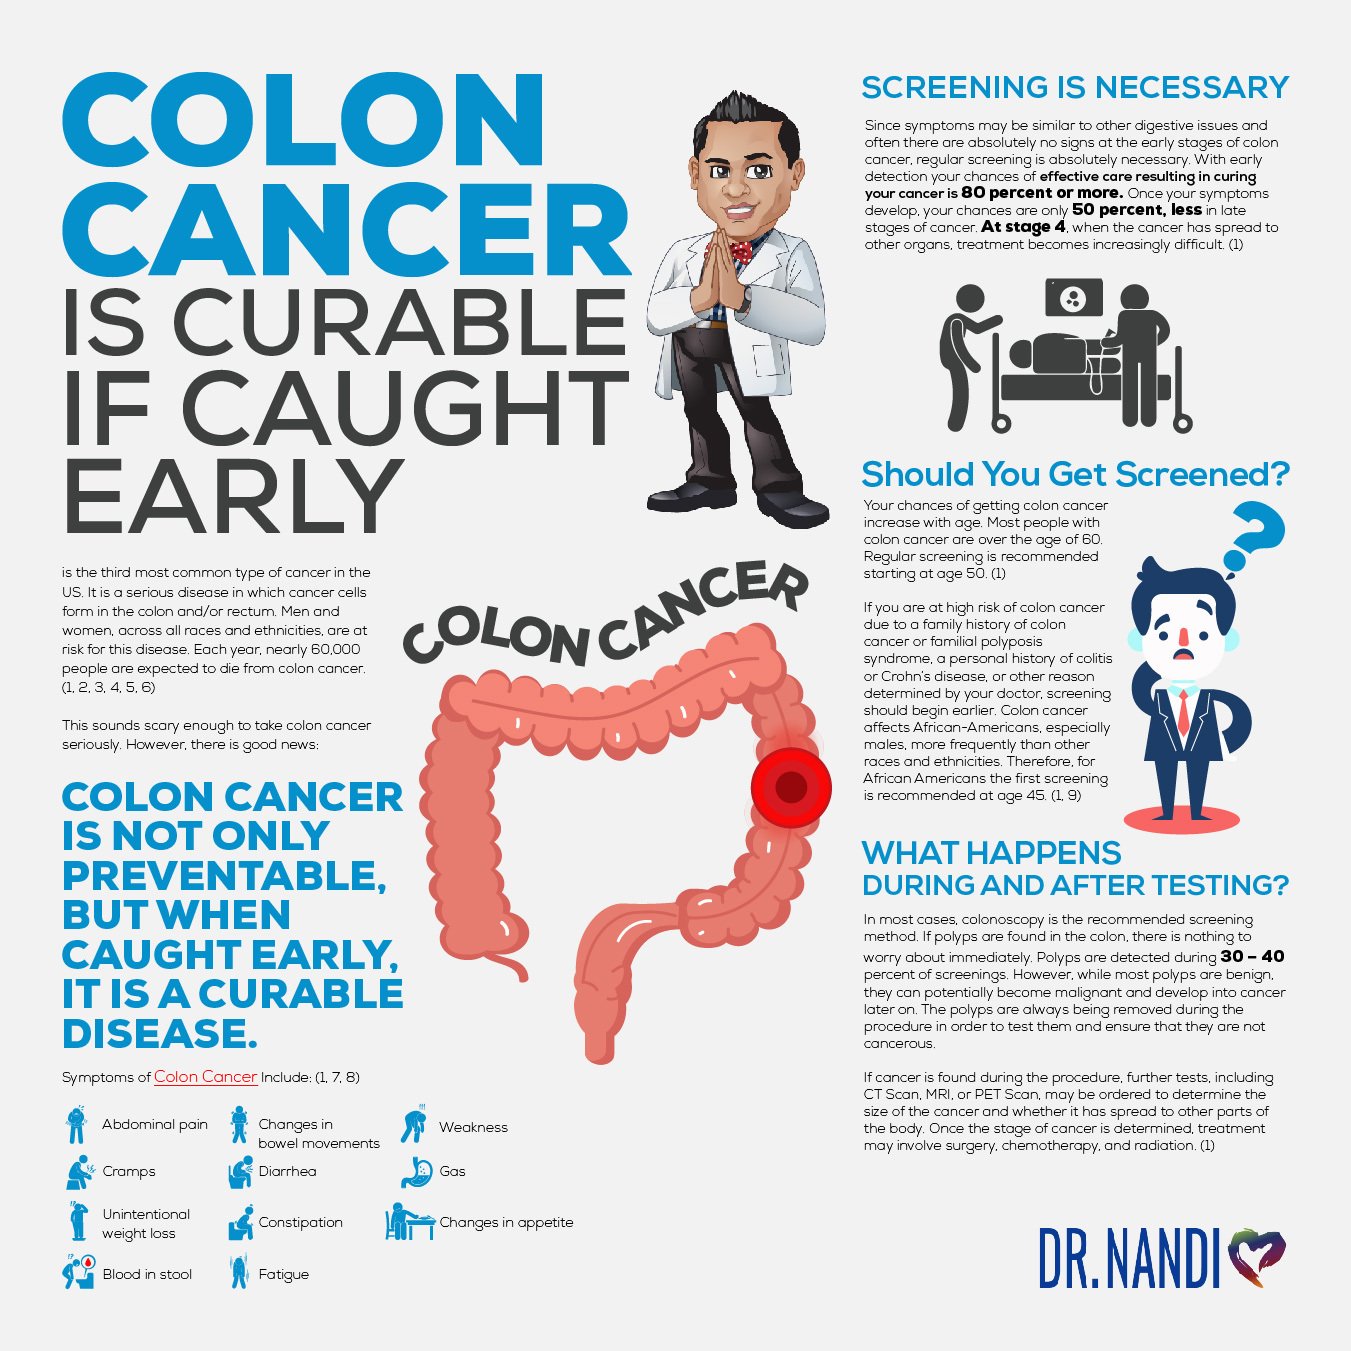 Colon Cancer Is Curable If Caught Early - Ask Dr Nandi